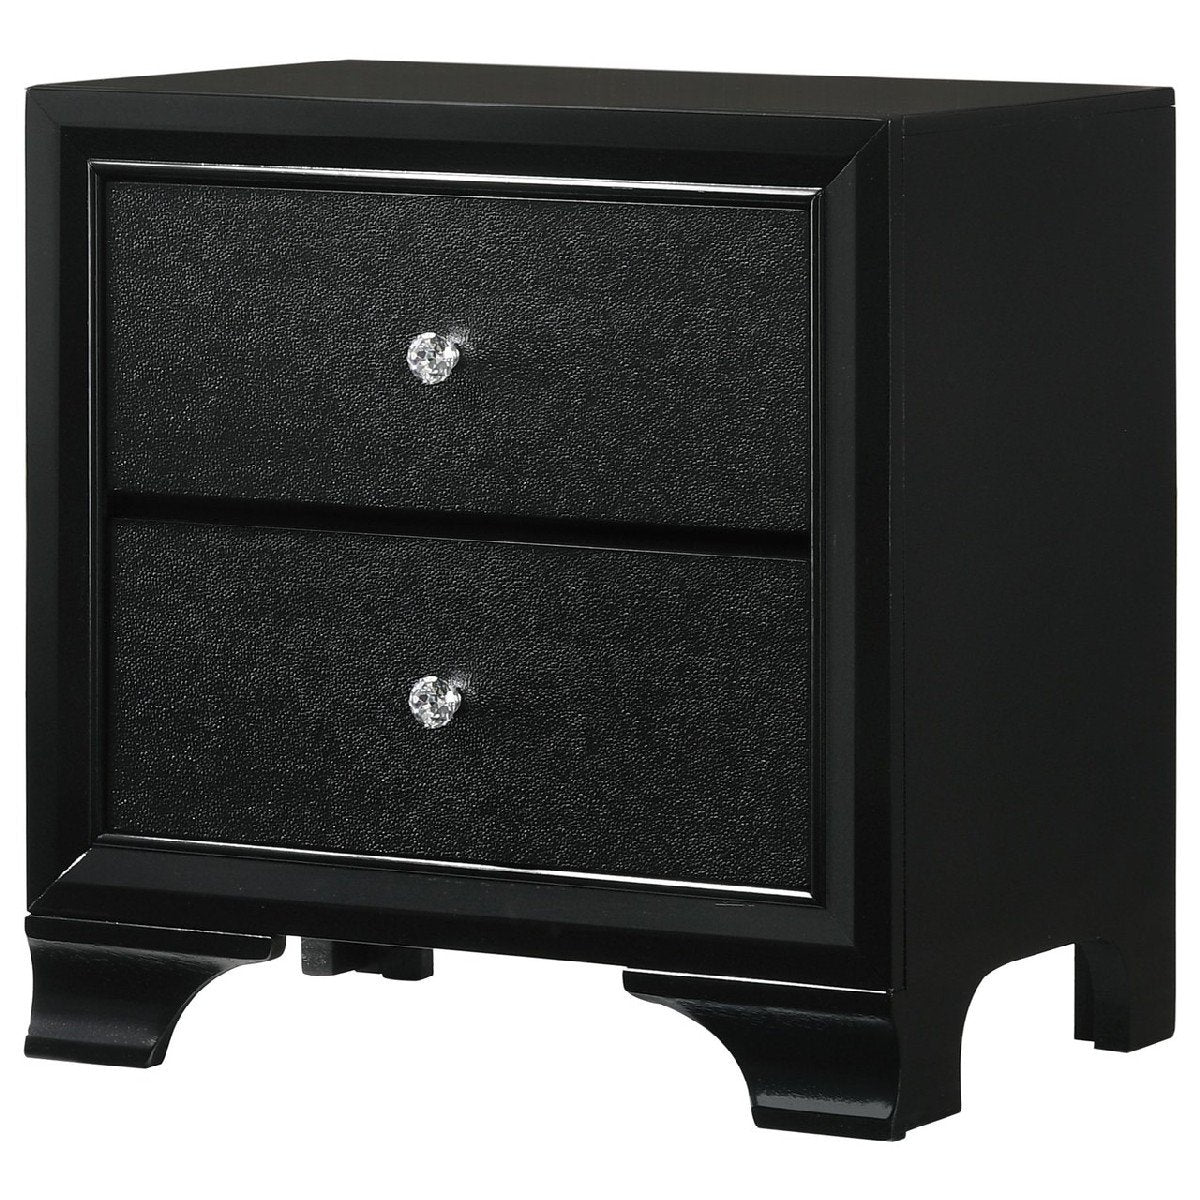 2 Drawer Wooden Nightstand with Textured Details and Crystal Pulls, Black - BM215425